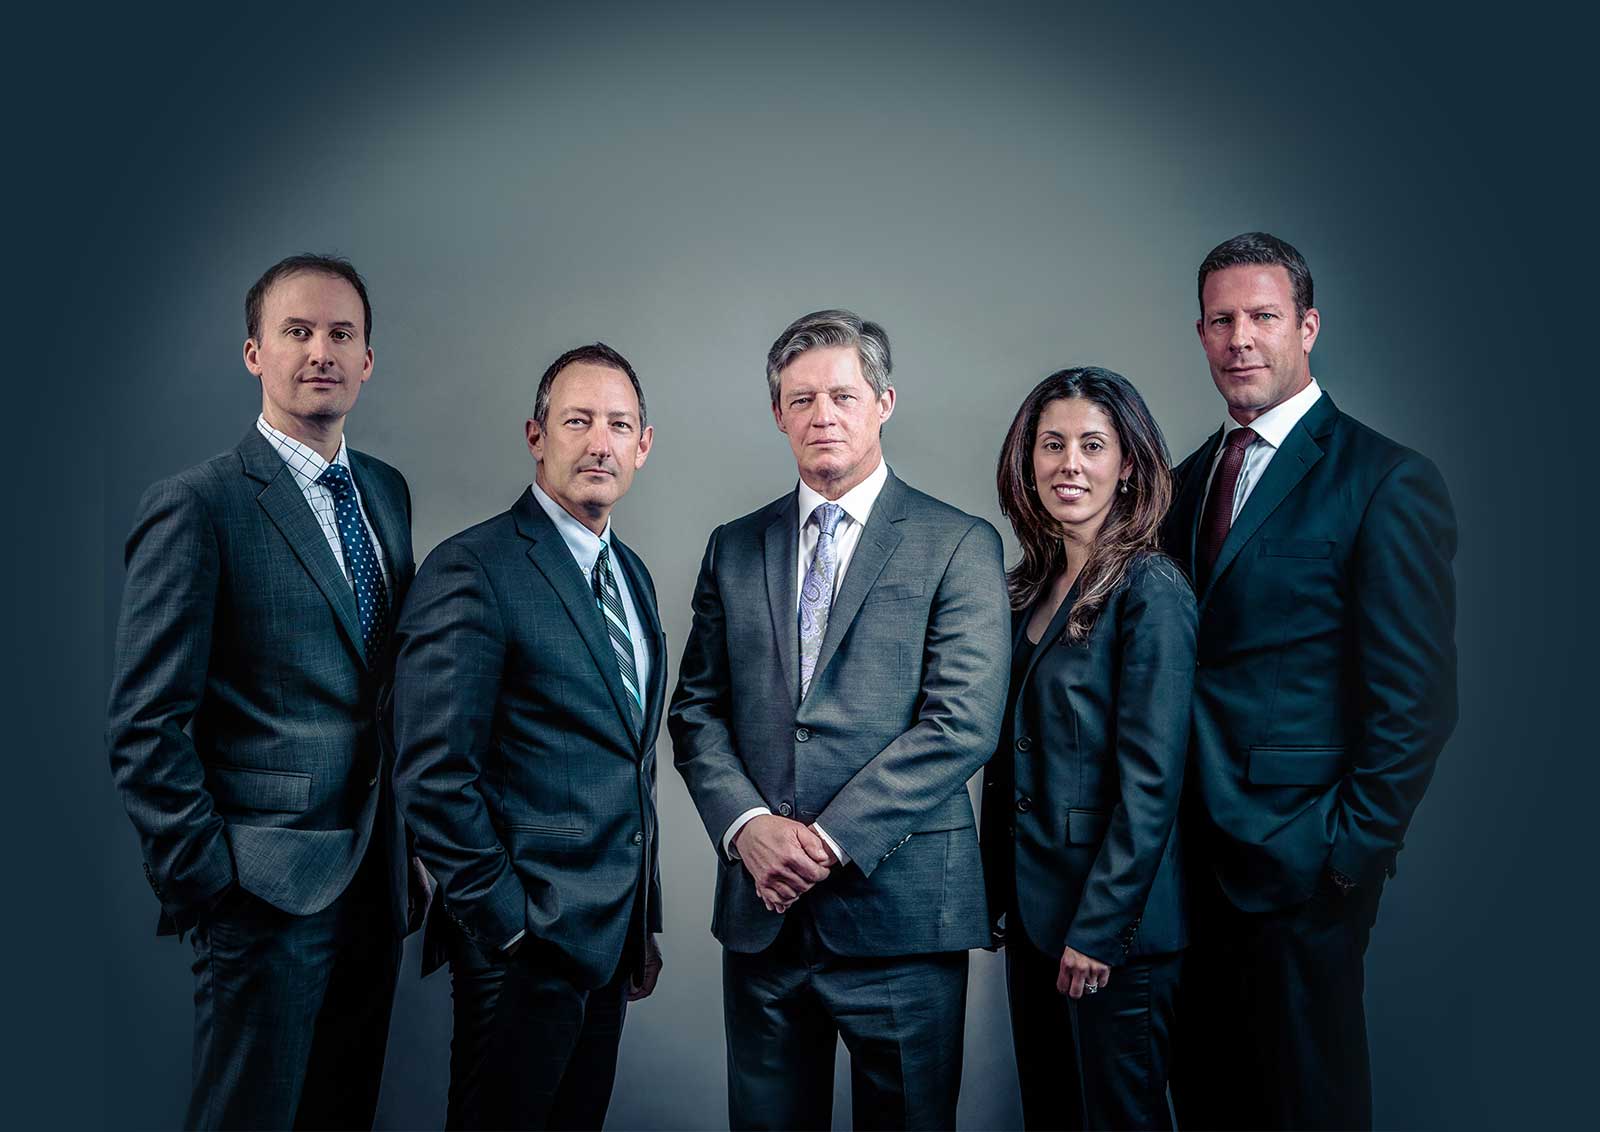 We are your <br>legal advisors